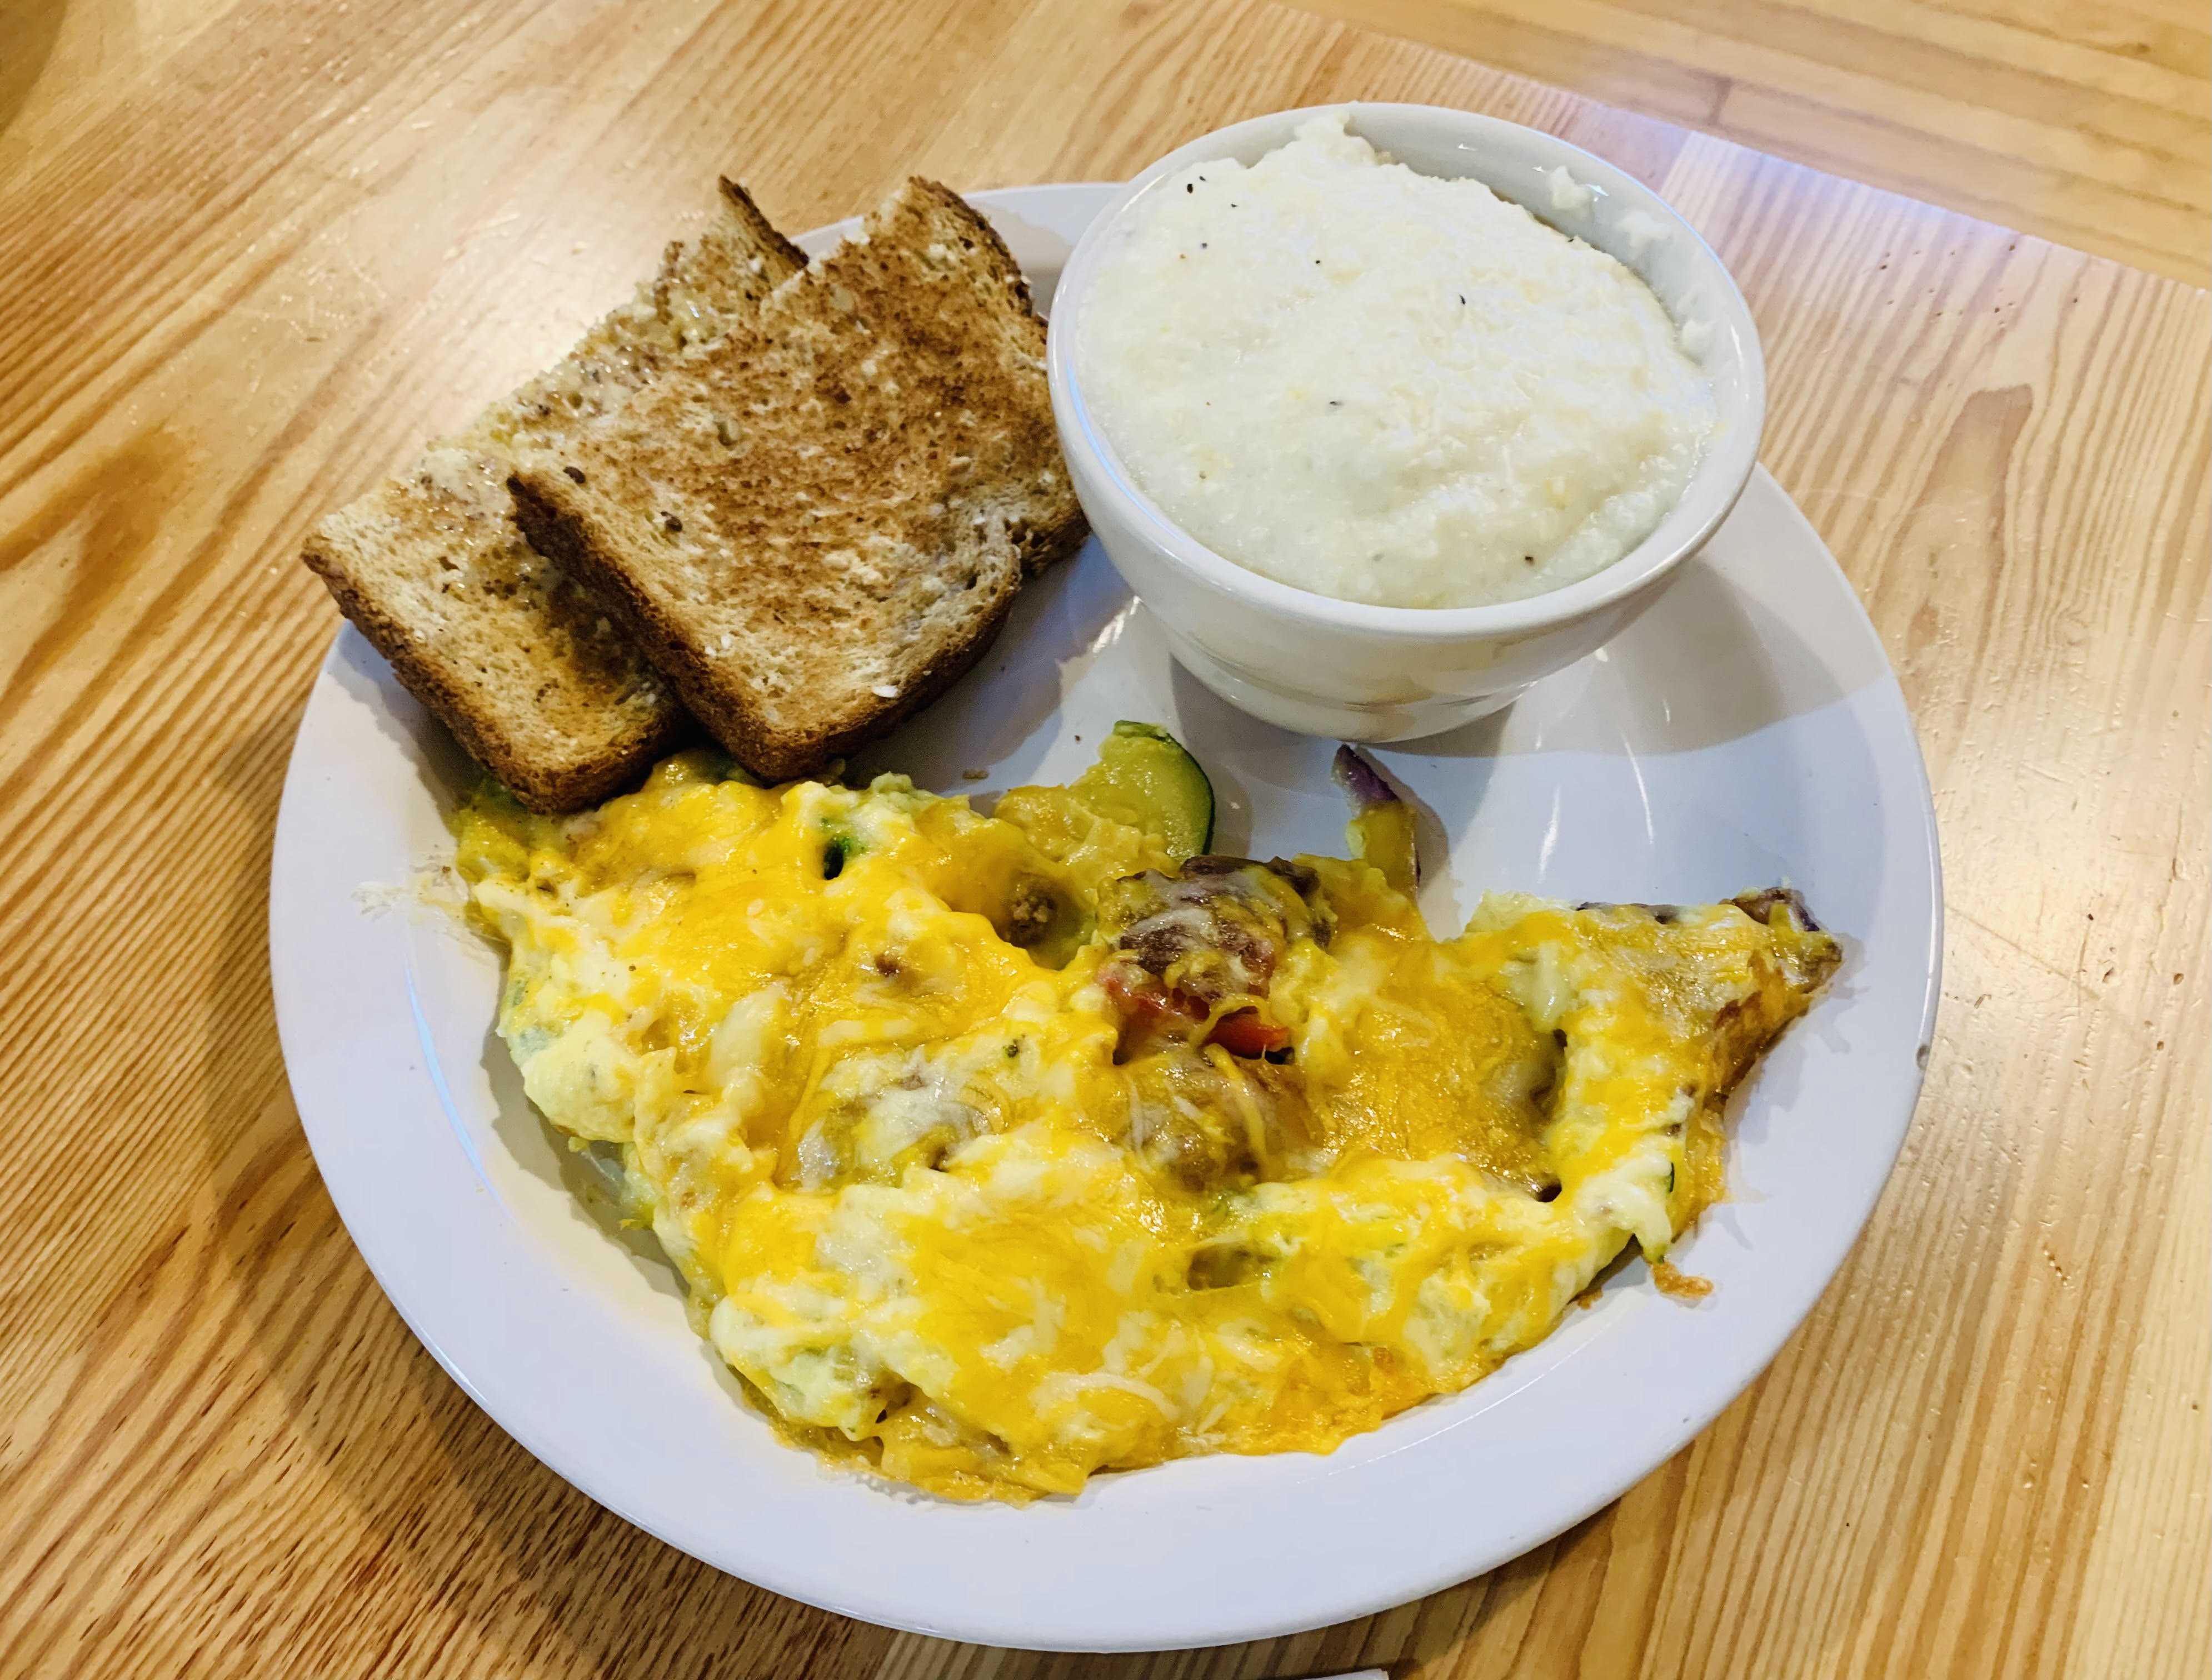 Scrambled eggs and grits (Featured as one of the best restaurants in Whitefish, Montana by top US family travel blog, Travel With A Plan!)